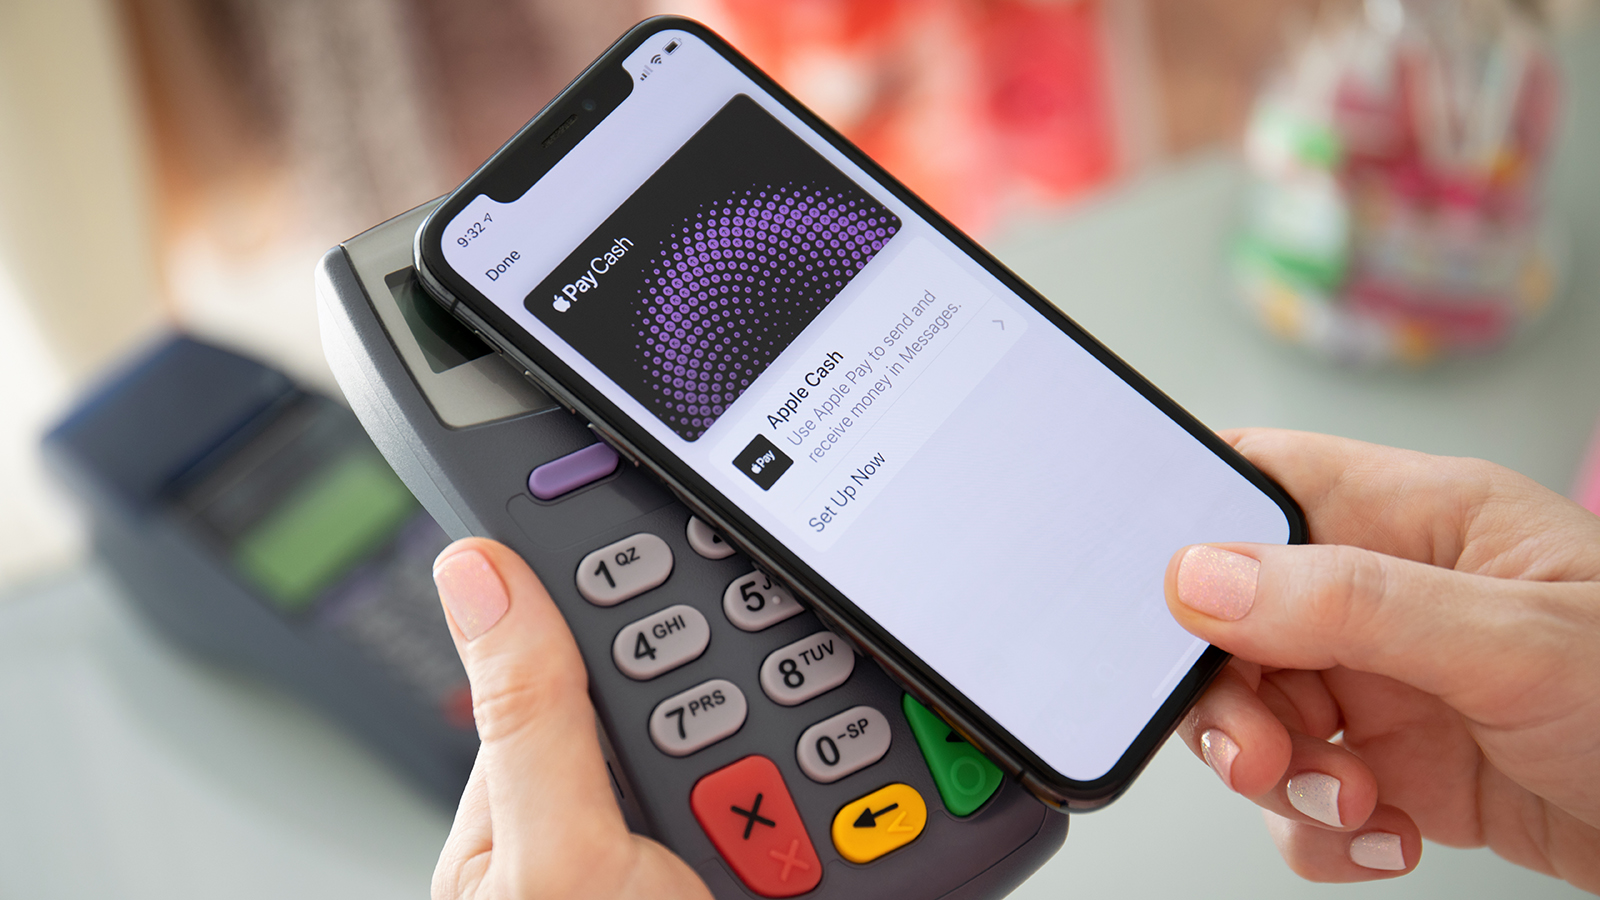 Anapa, Russia - August 10, 2019: Woman hand holding iPhone X with Apple Pay Cash on the screen and pay pass online terminal. iPhone was created and developed by the Apple inc.